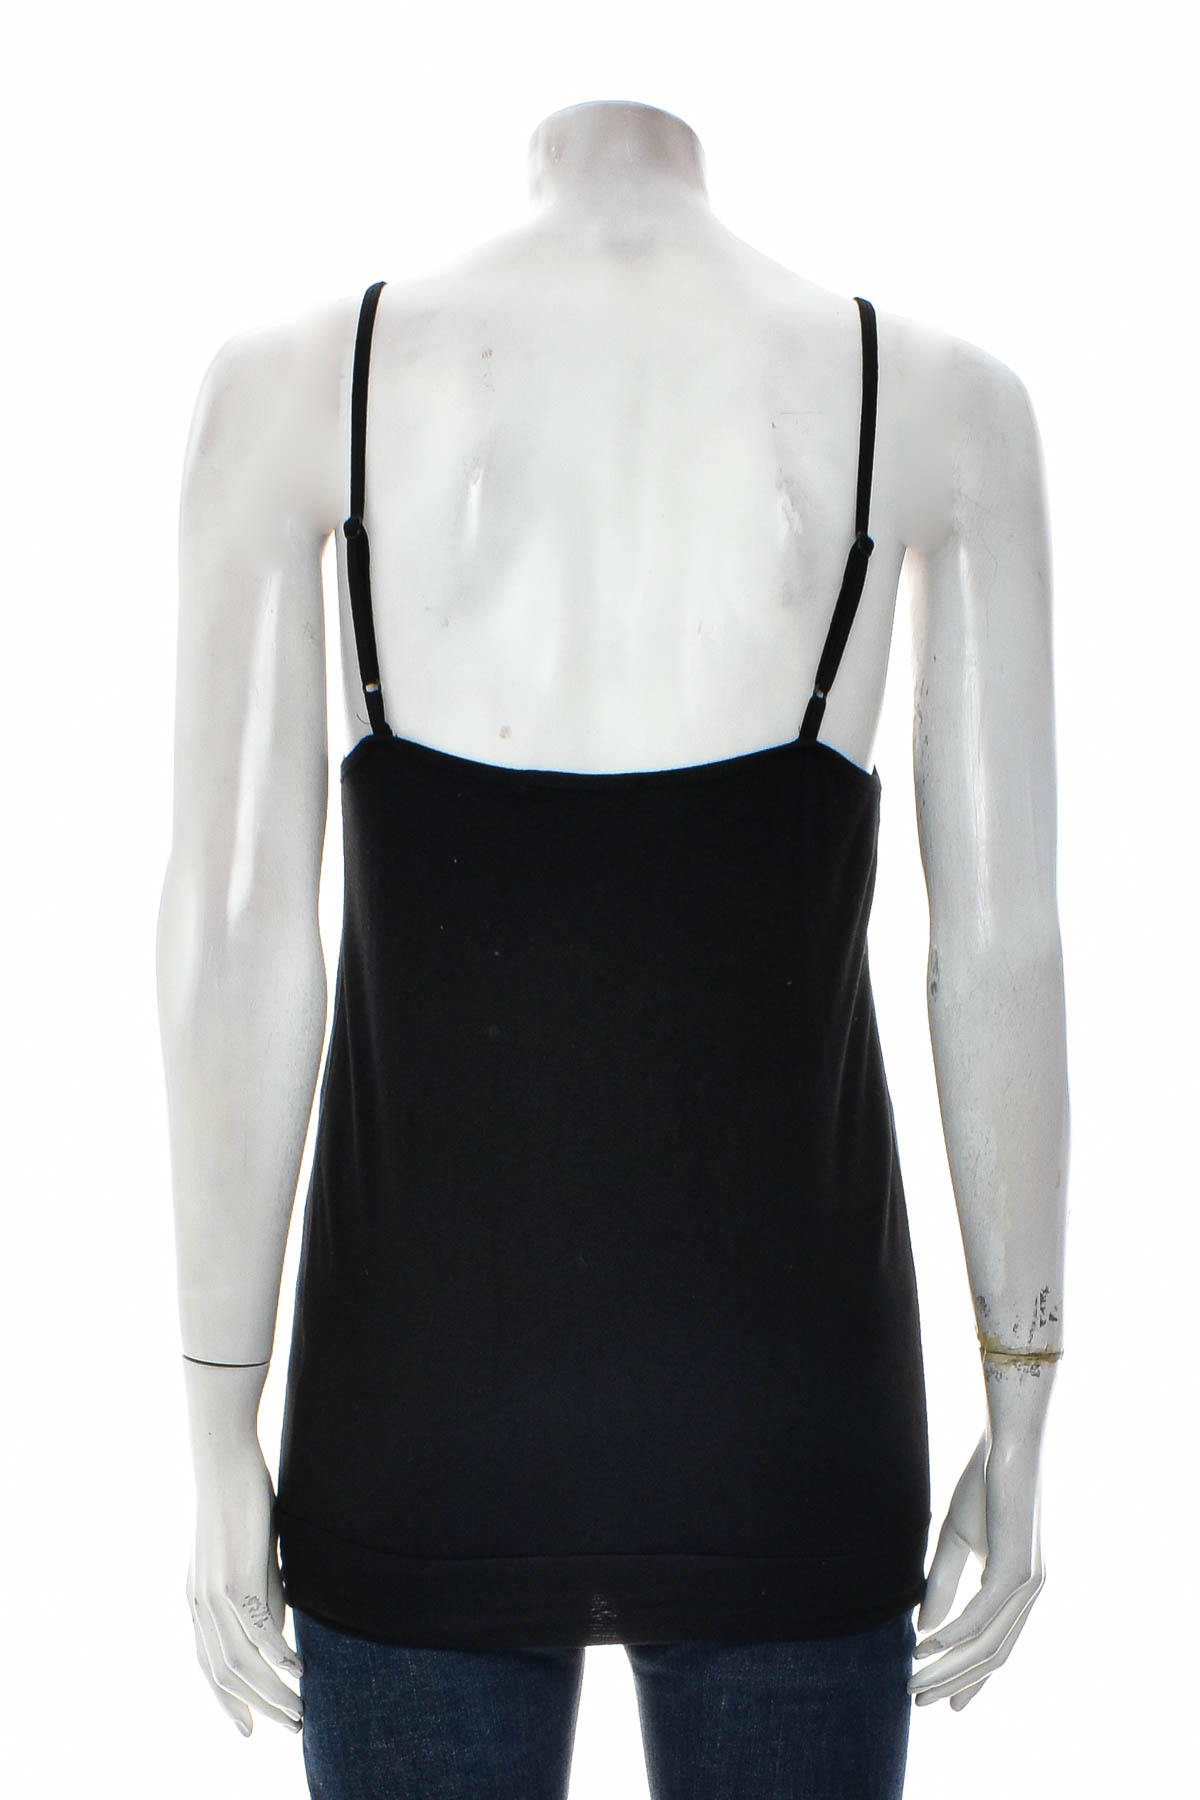 Women's top - Muse - 1